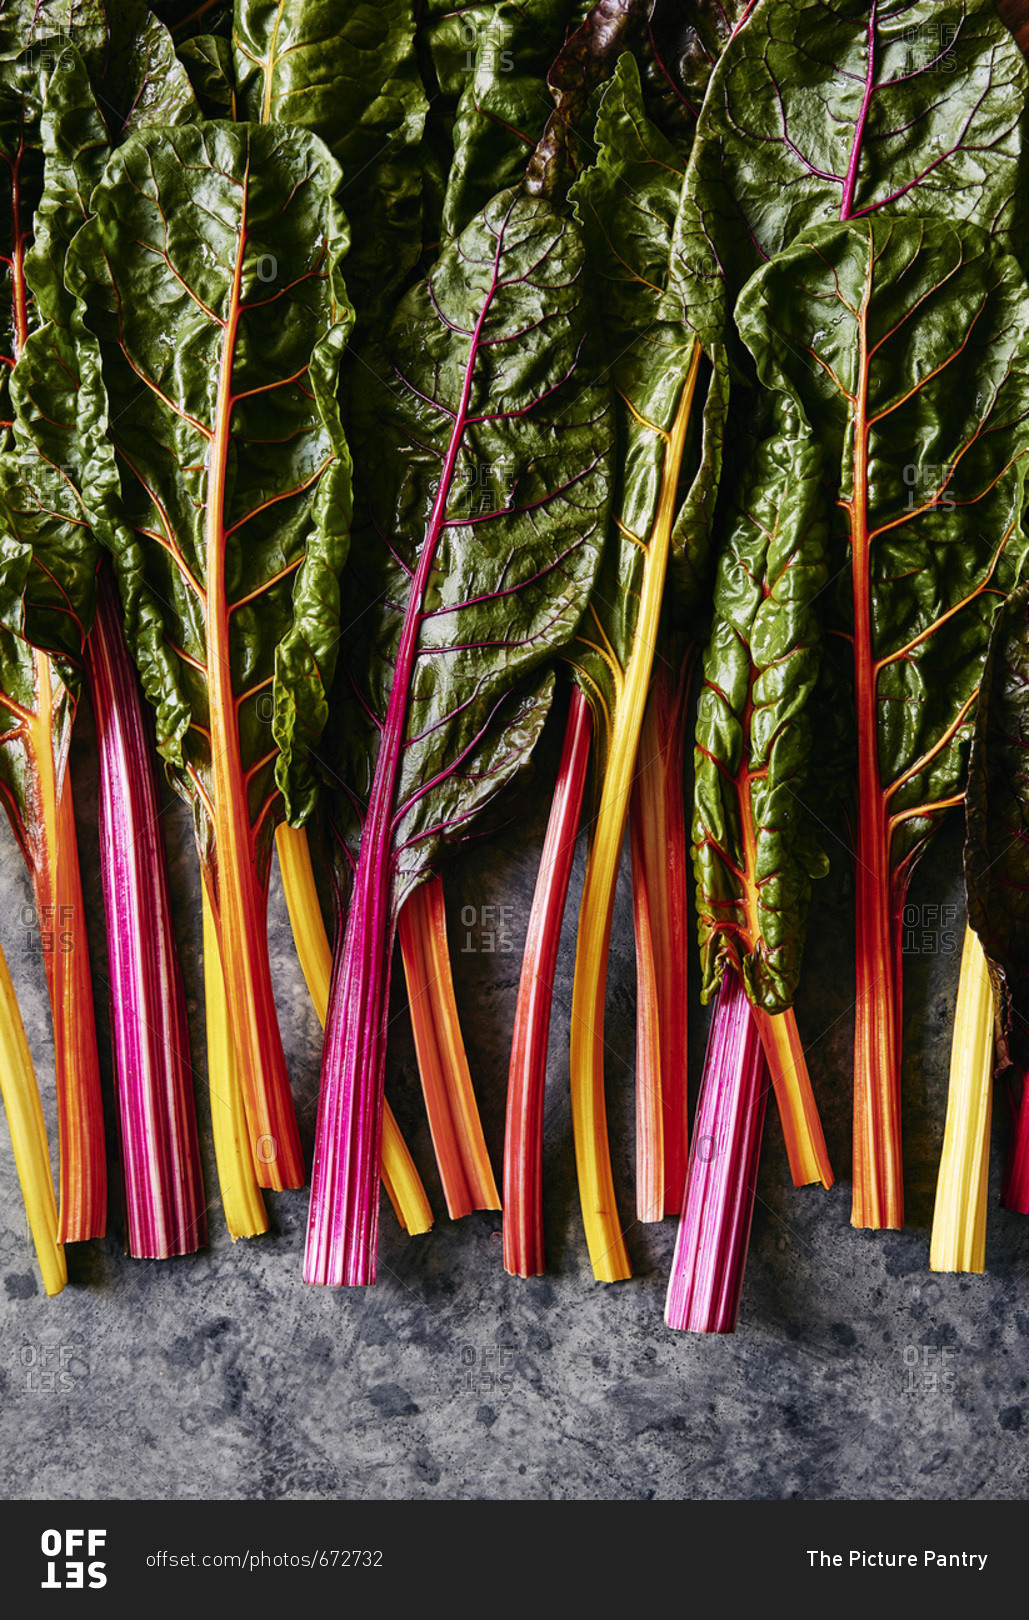 Freshly picked rainbow chard with multicolored stems